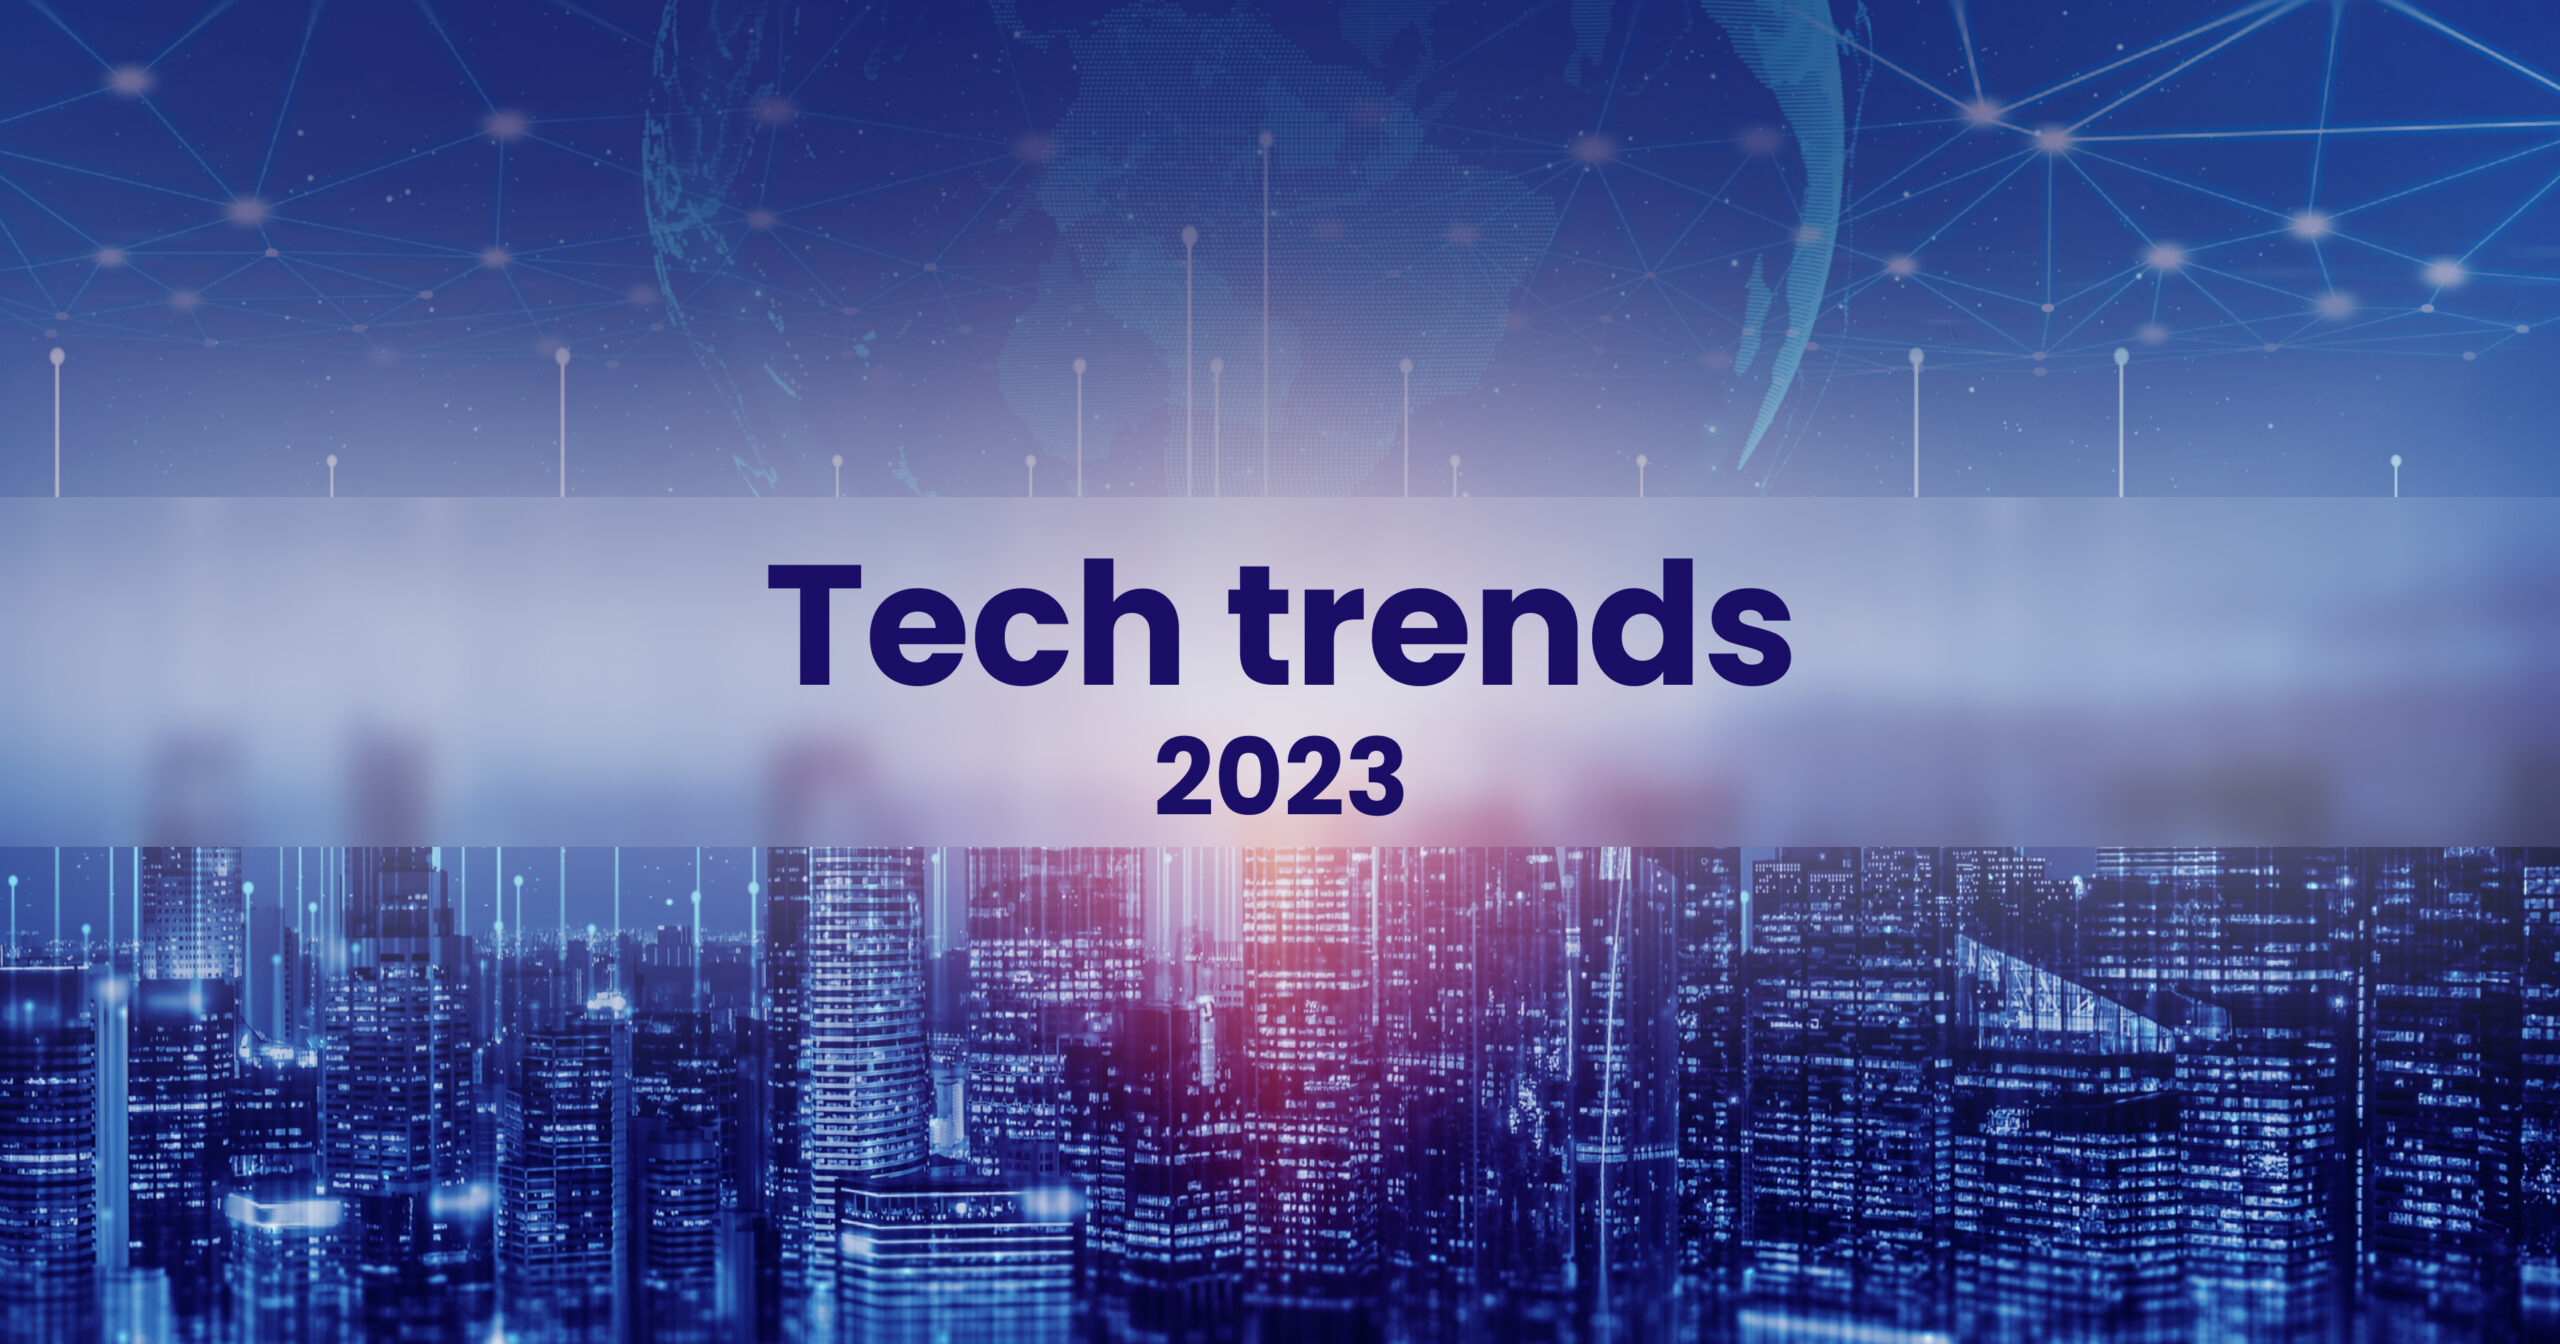 Tech trends 2023 every business should consider   